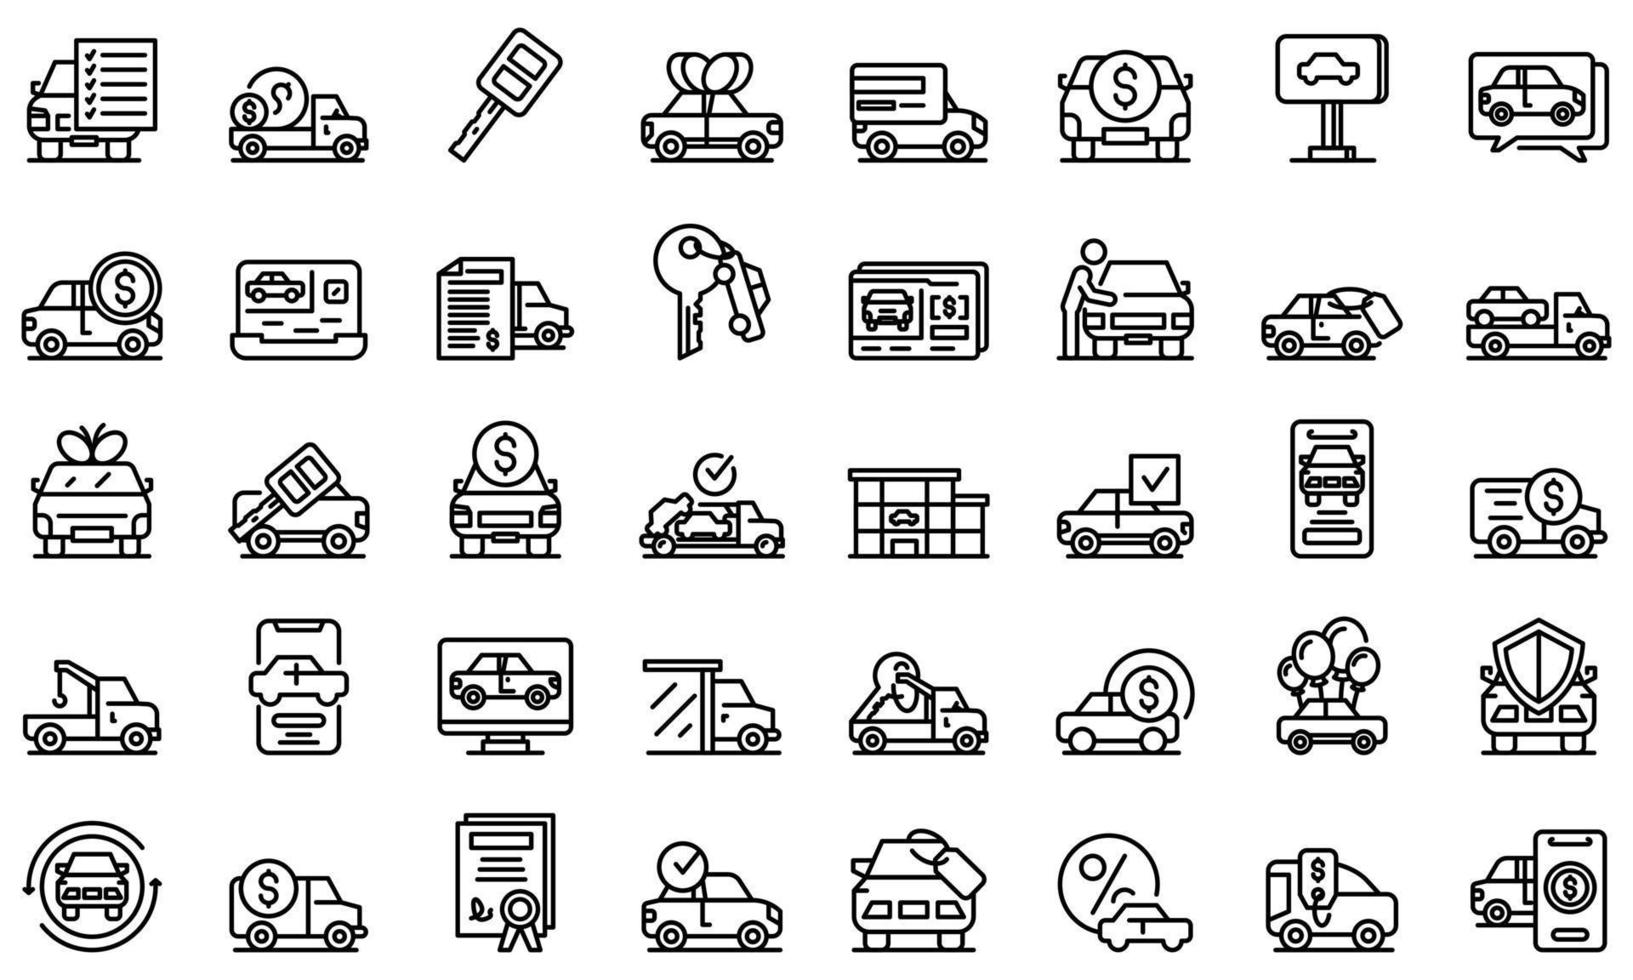 Buying car icons set, outline style vector